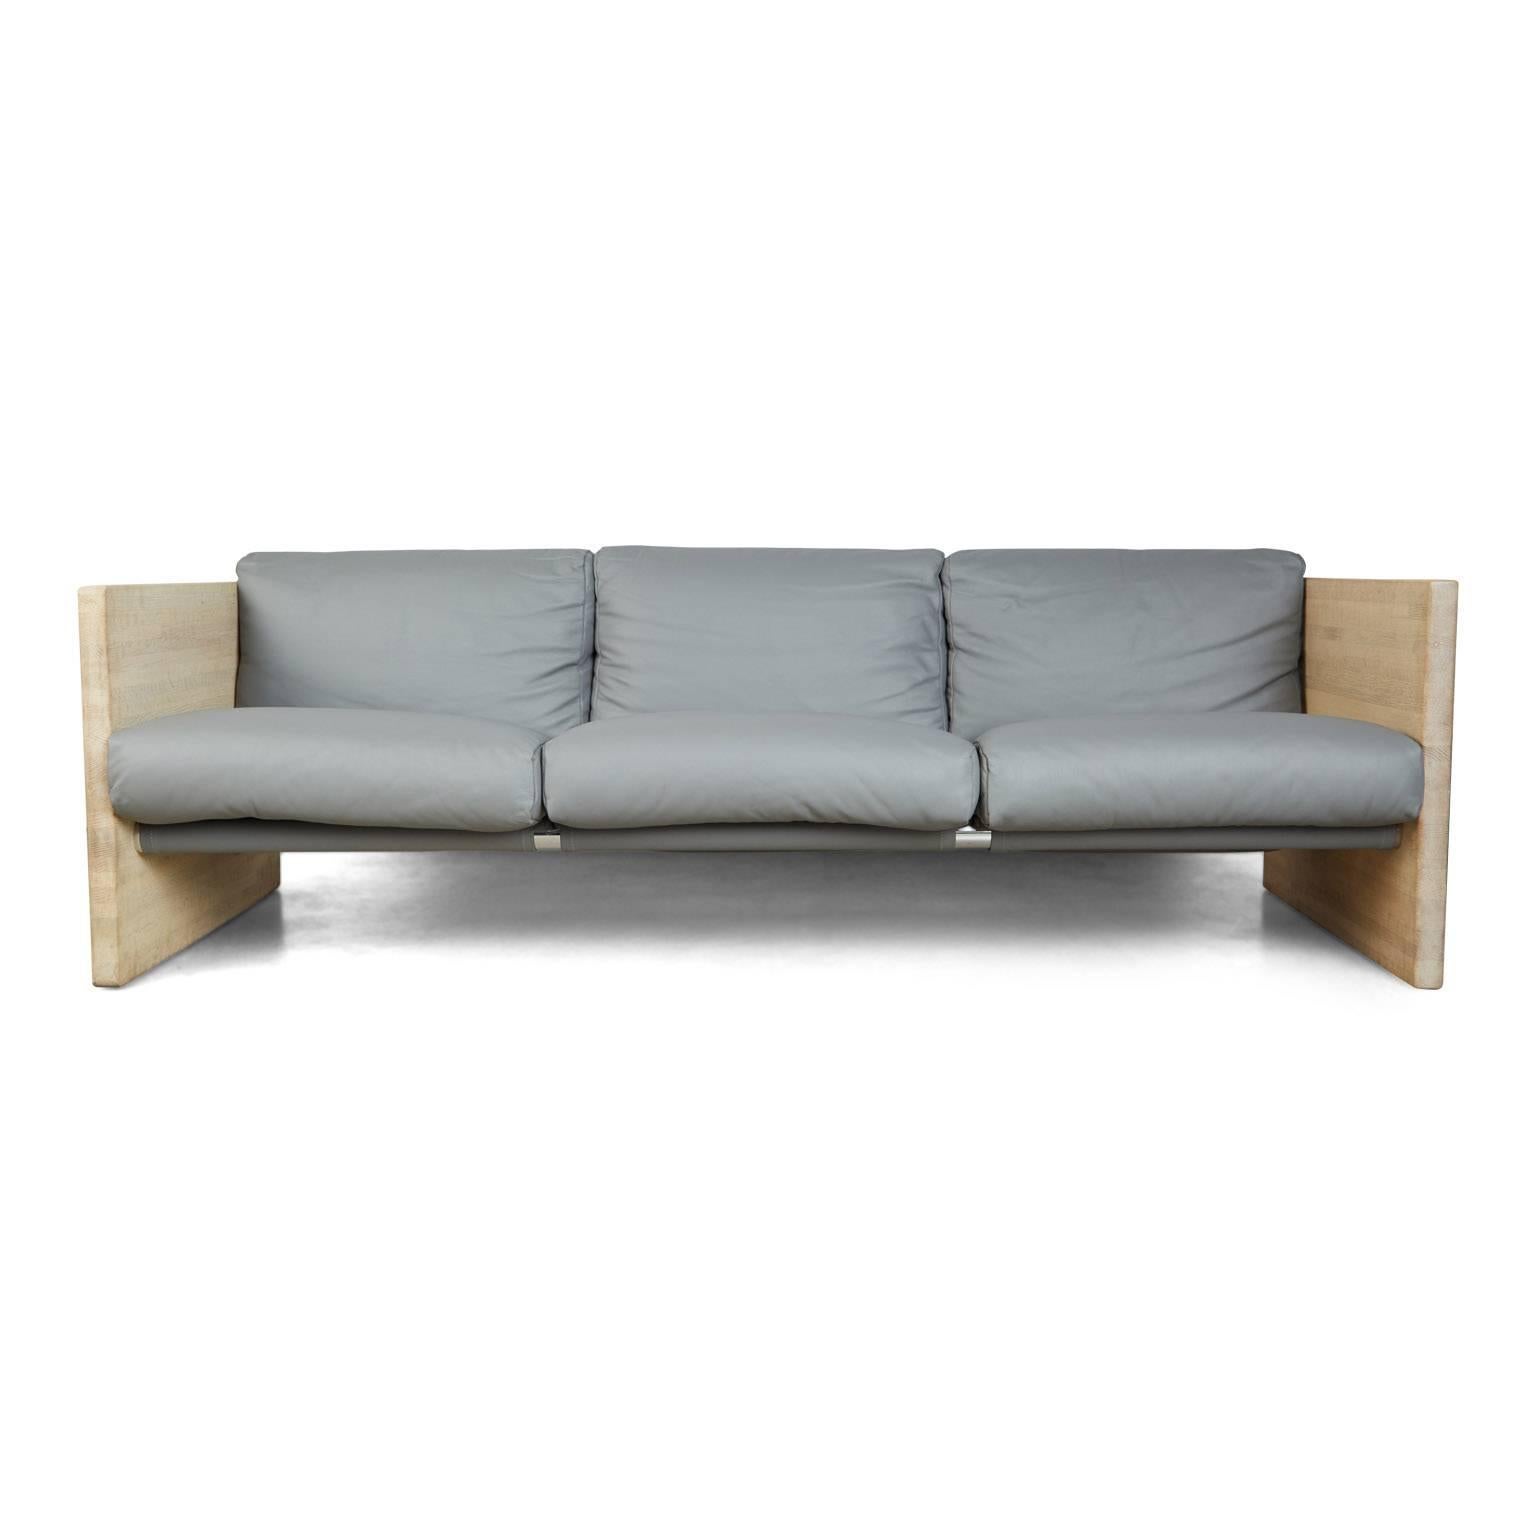 Handsome, recently restored Milo Baughman styled case sofa, newly upholstered using gorgeous on-trend light gray leather. Featuring angular cube shaped end panels, creating a strong, square Silhouette when this piece is viewed in profile. 

The